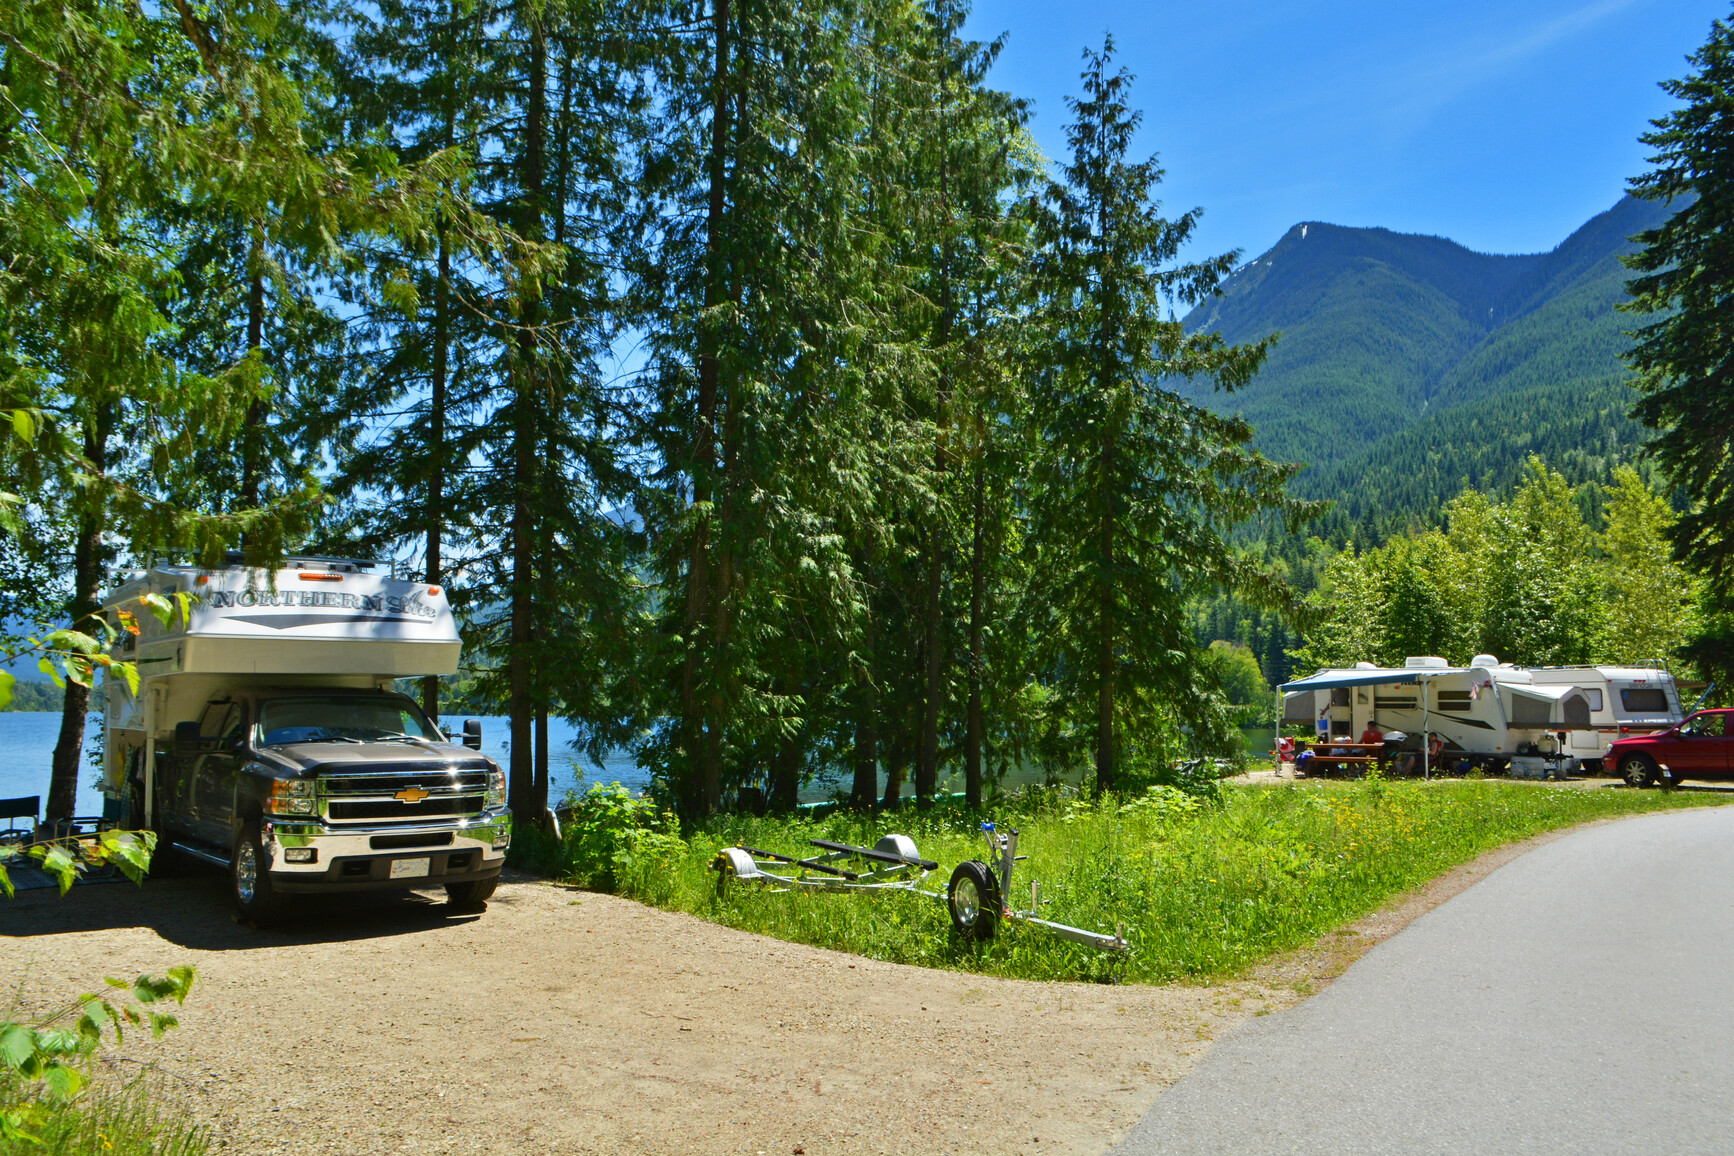 Summit Lake Park campground. Trailers and vehicles are in lakeside campsites. The lake and mountains are in the background of the campsite.